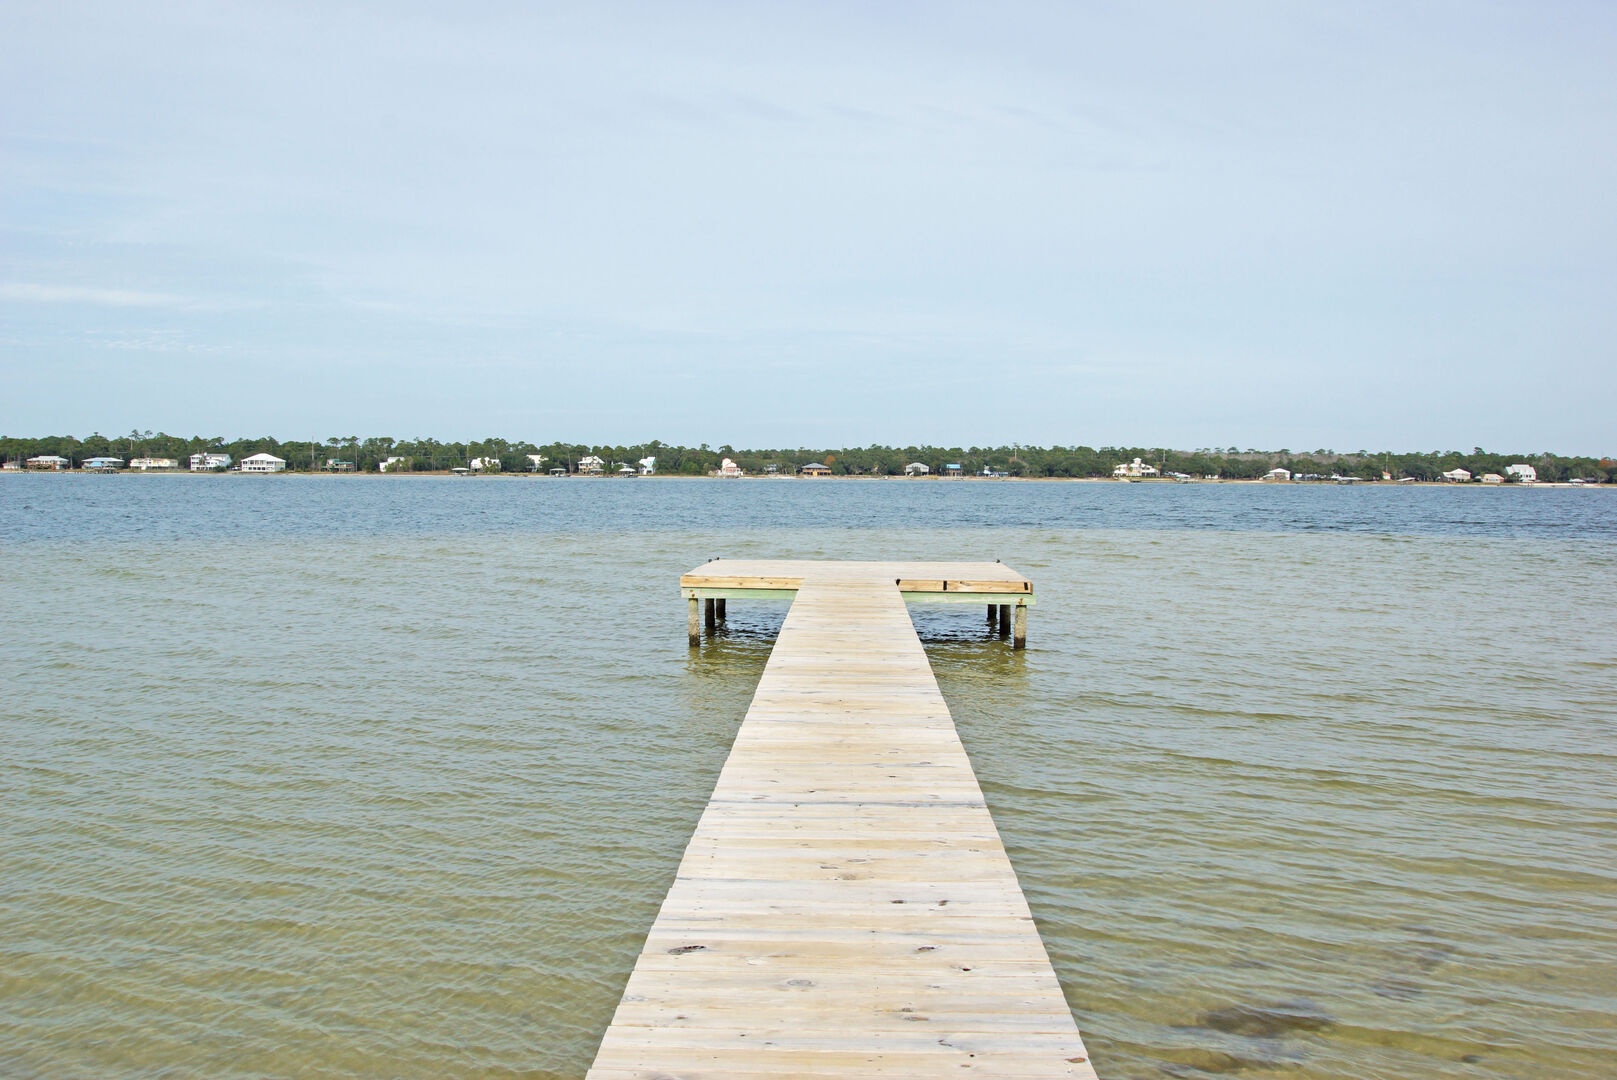 Guests may fish, swim and kayak from private pier